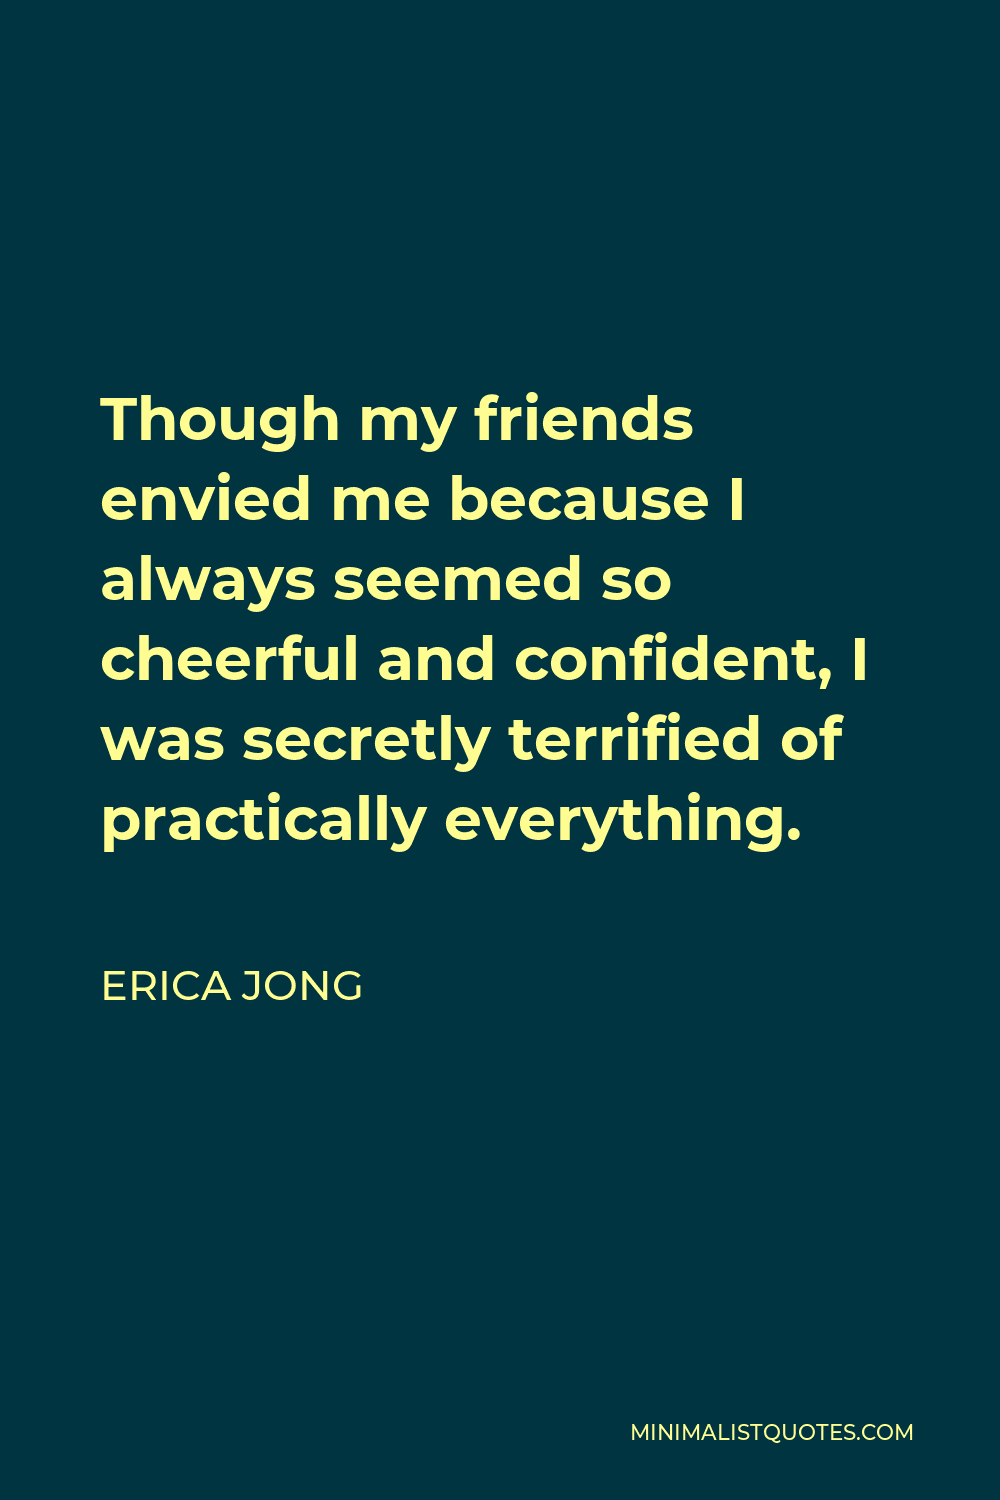 Erica Jong Quote - Though my friends envied me because I always seemed so cheerful and confident, I was secretly terrified of practically everything.